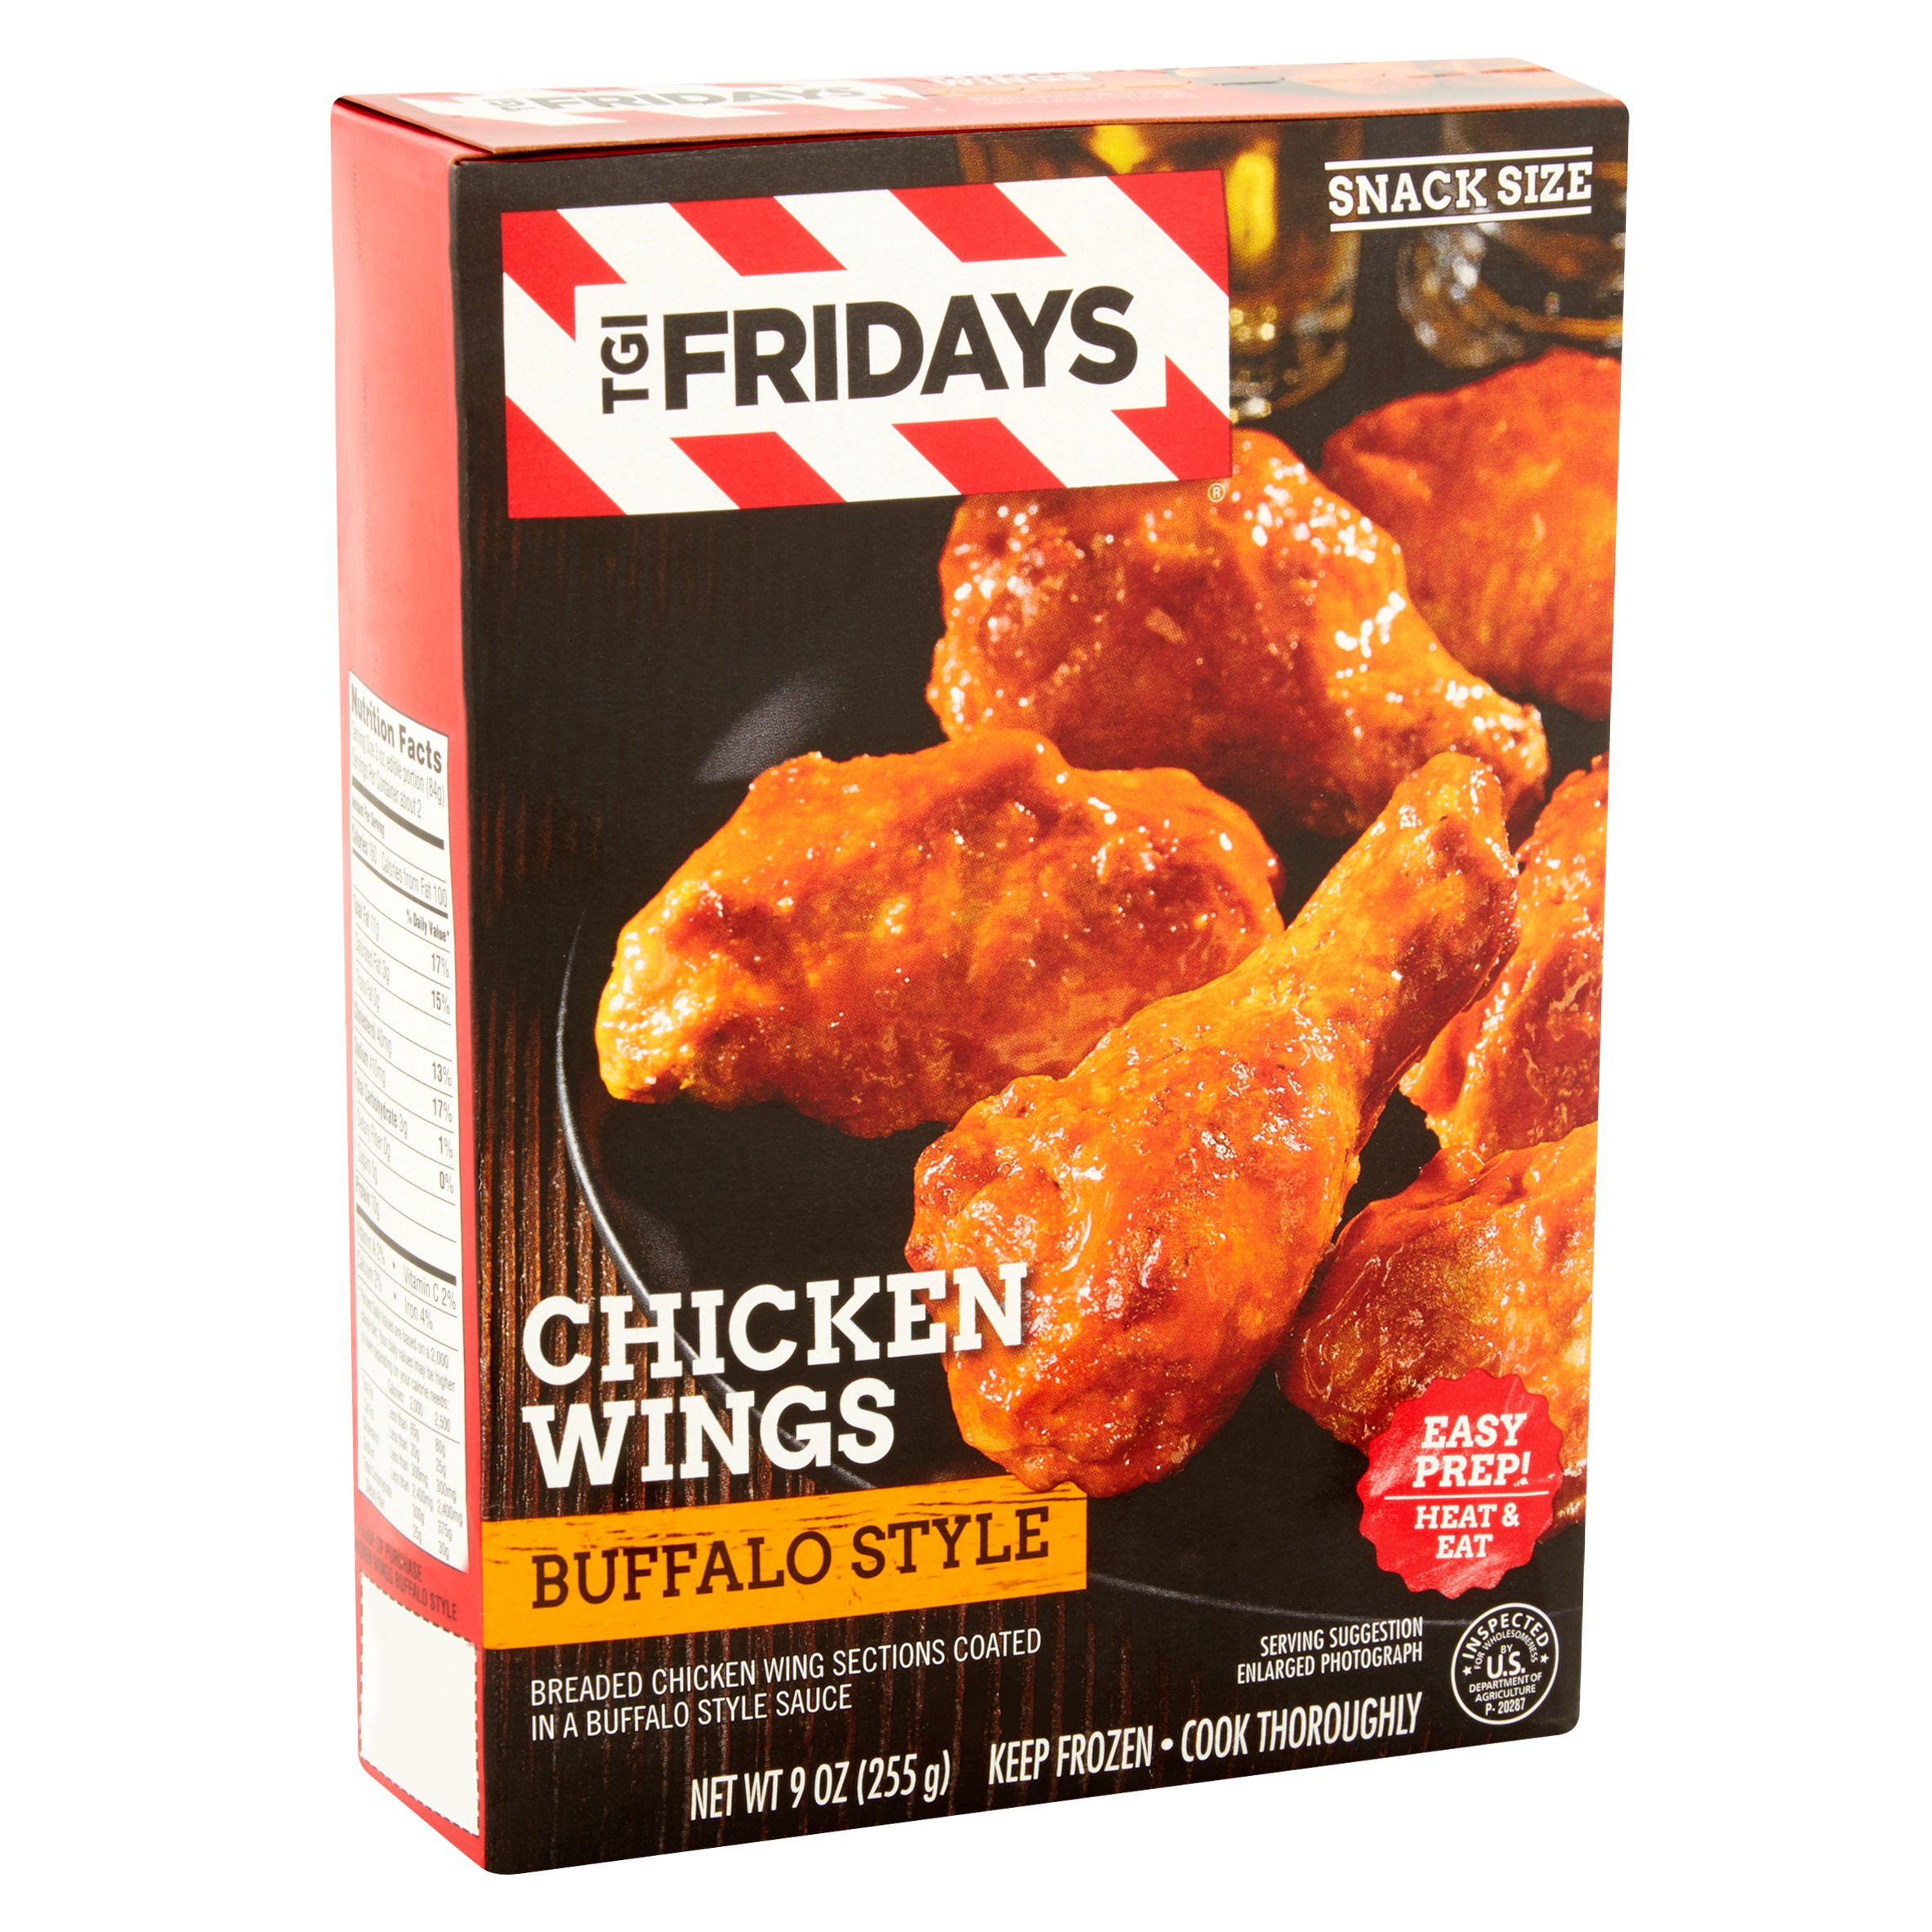 Wholesale Chicken Wings
 where to chicken wings in bulk